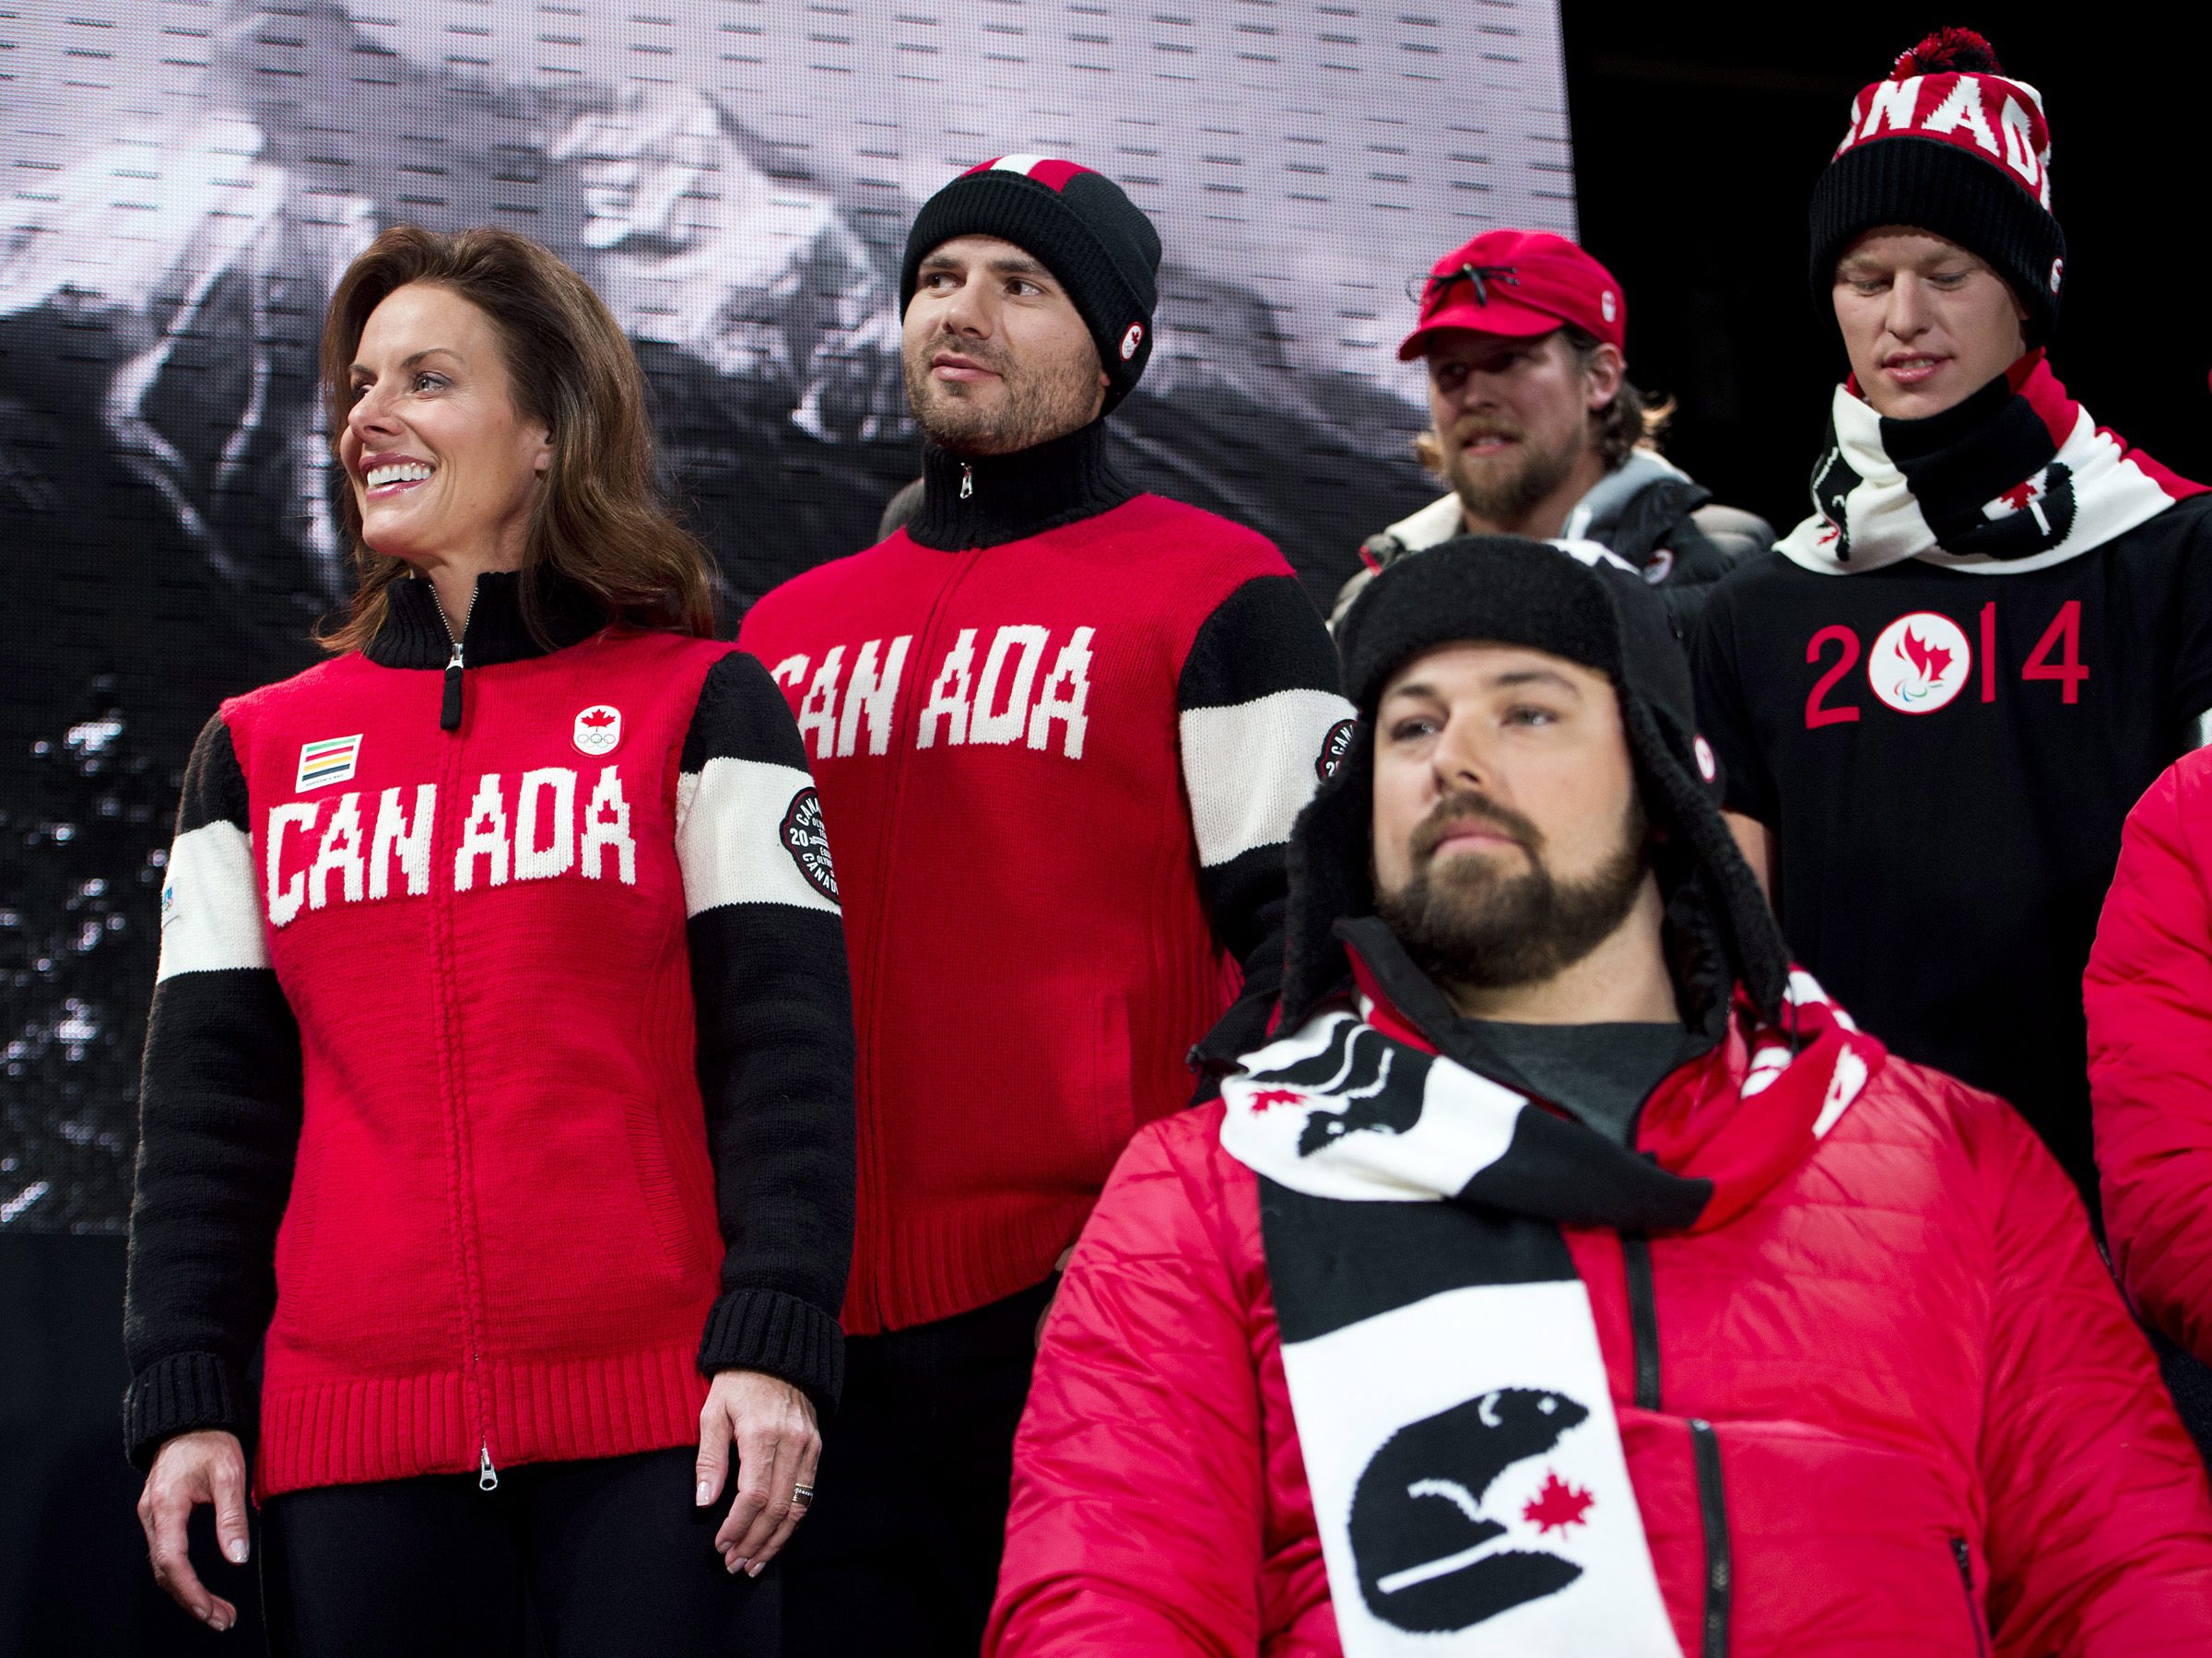 It's entirely possible the Canadian team's uniforms were knitted by their moms.